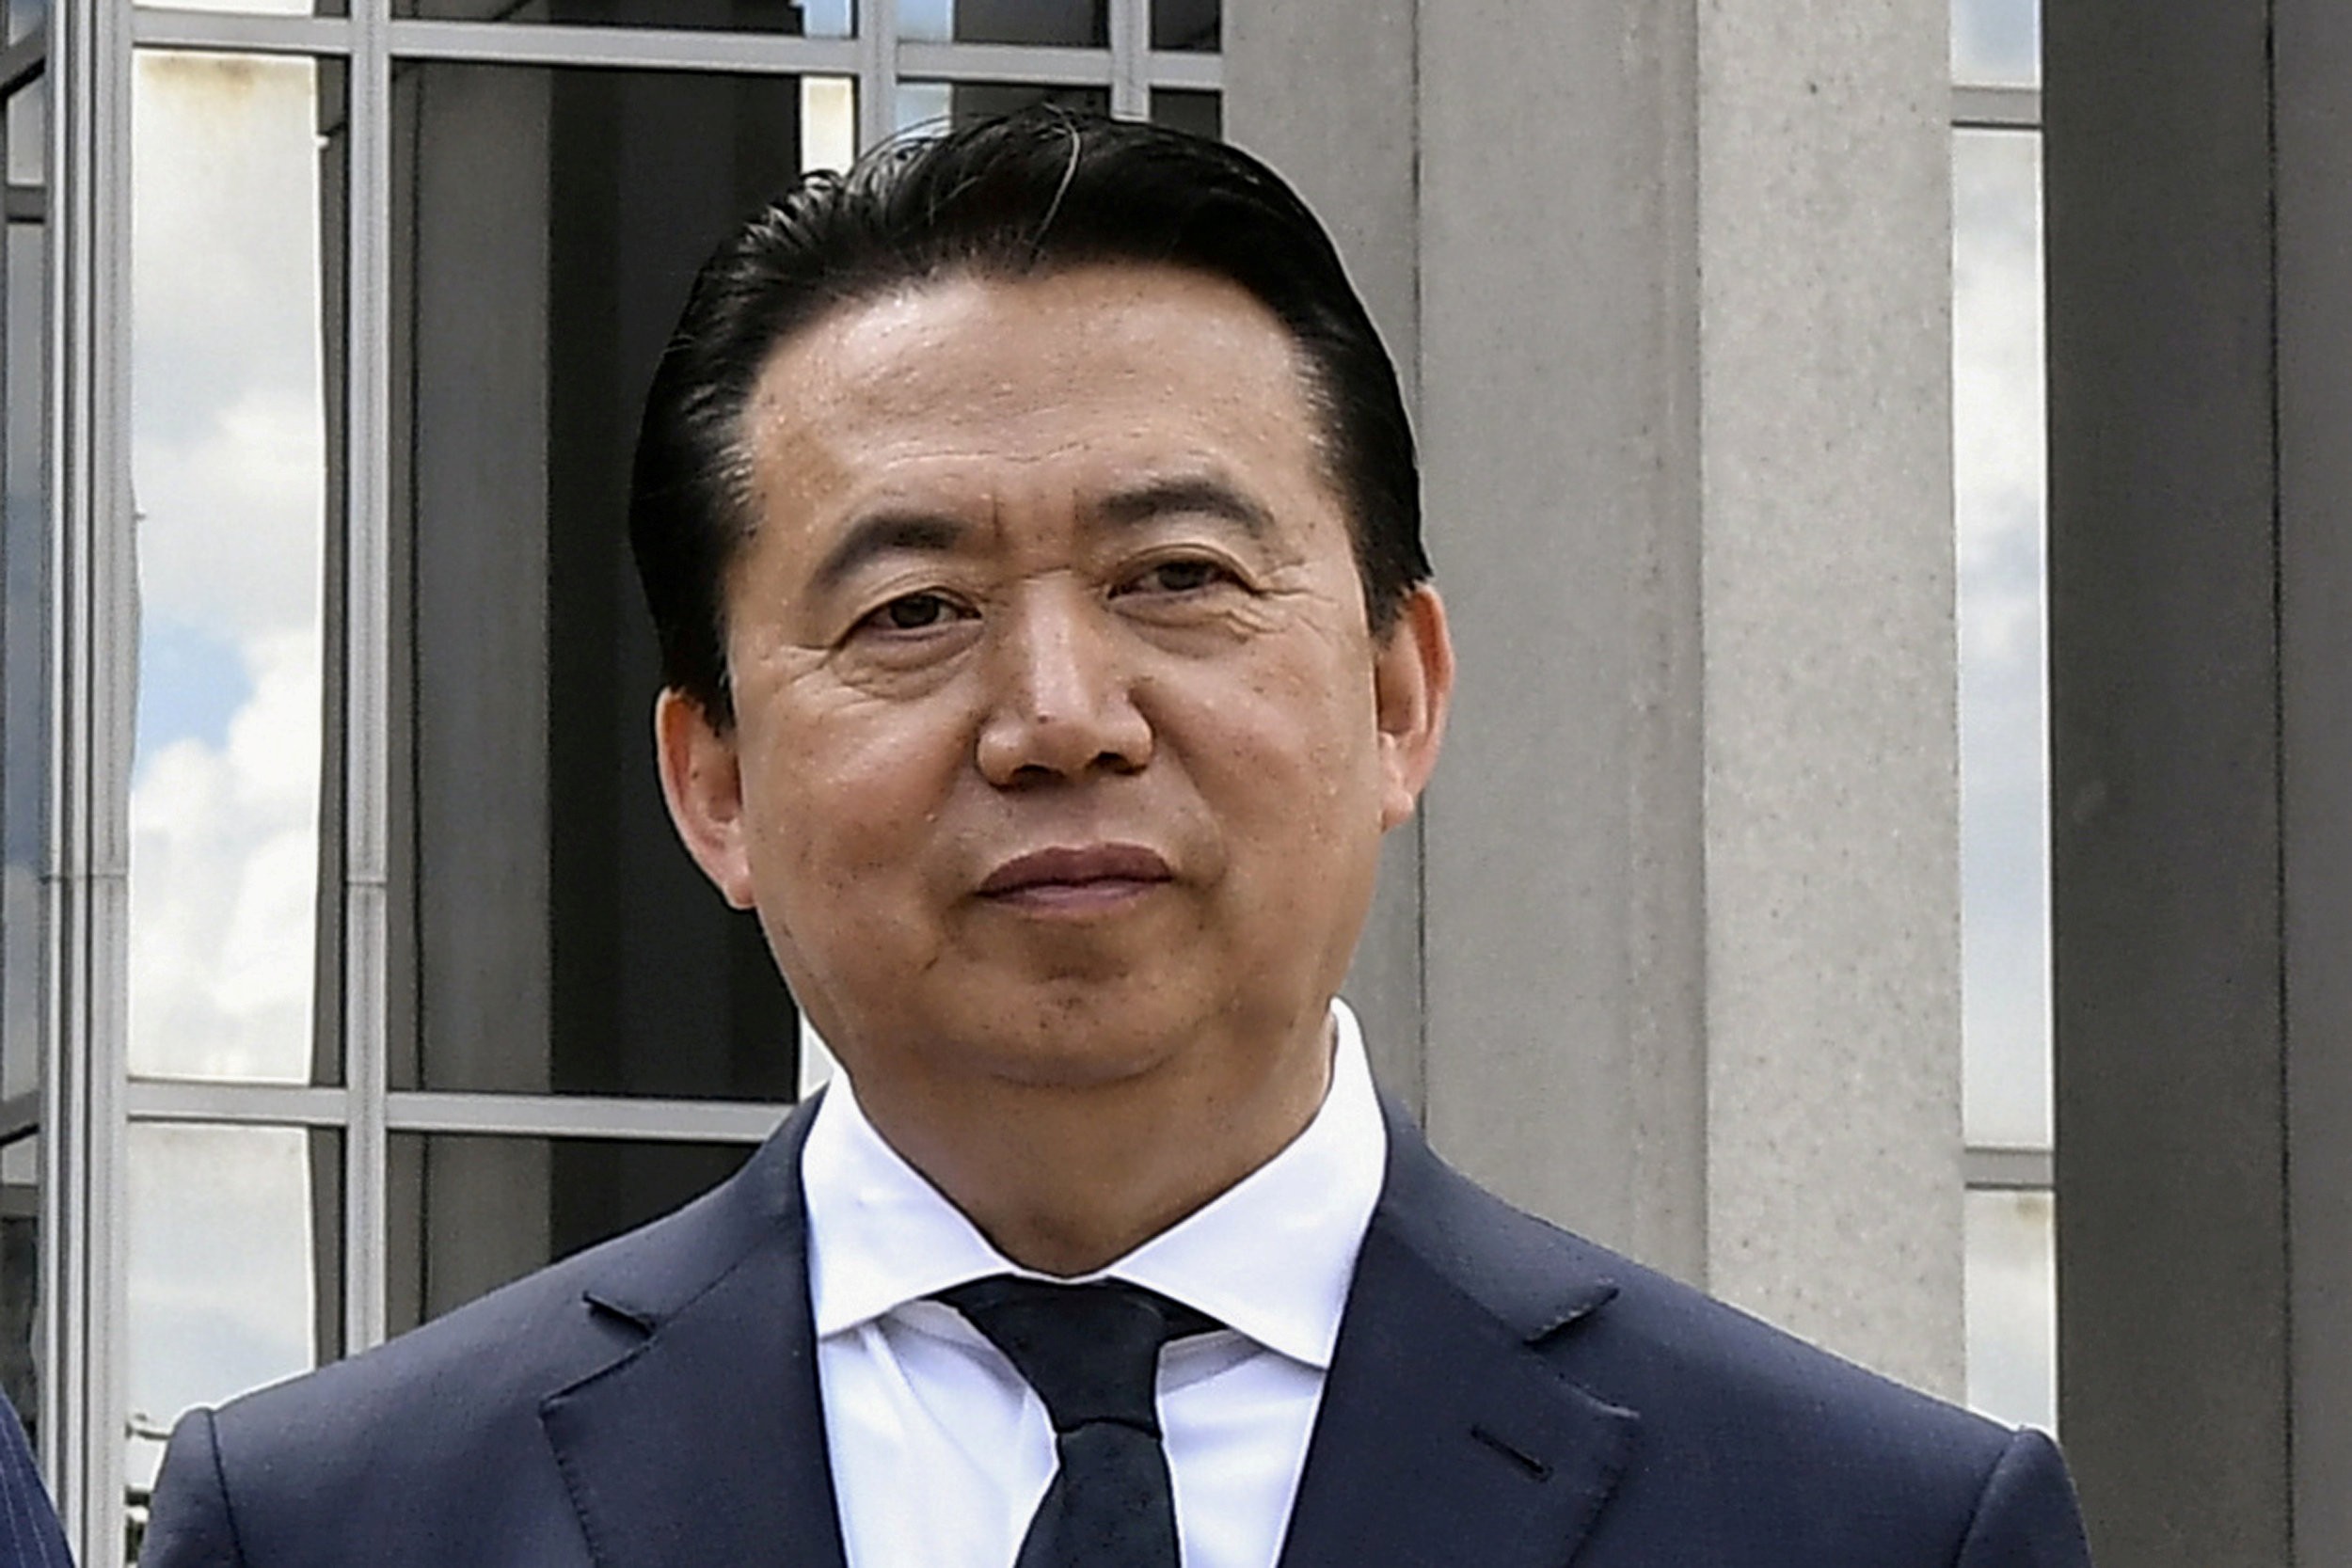 Meng Hongwei was reported missing by his wife last week. Photo: Reuters